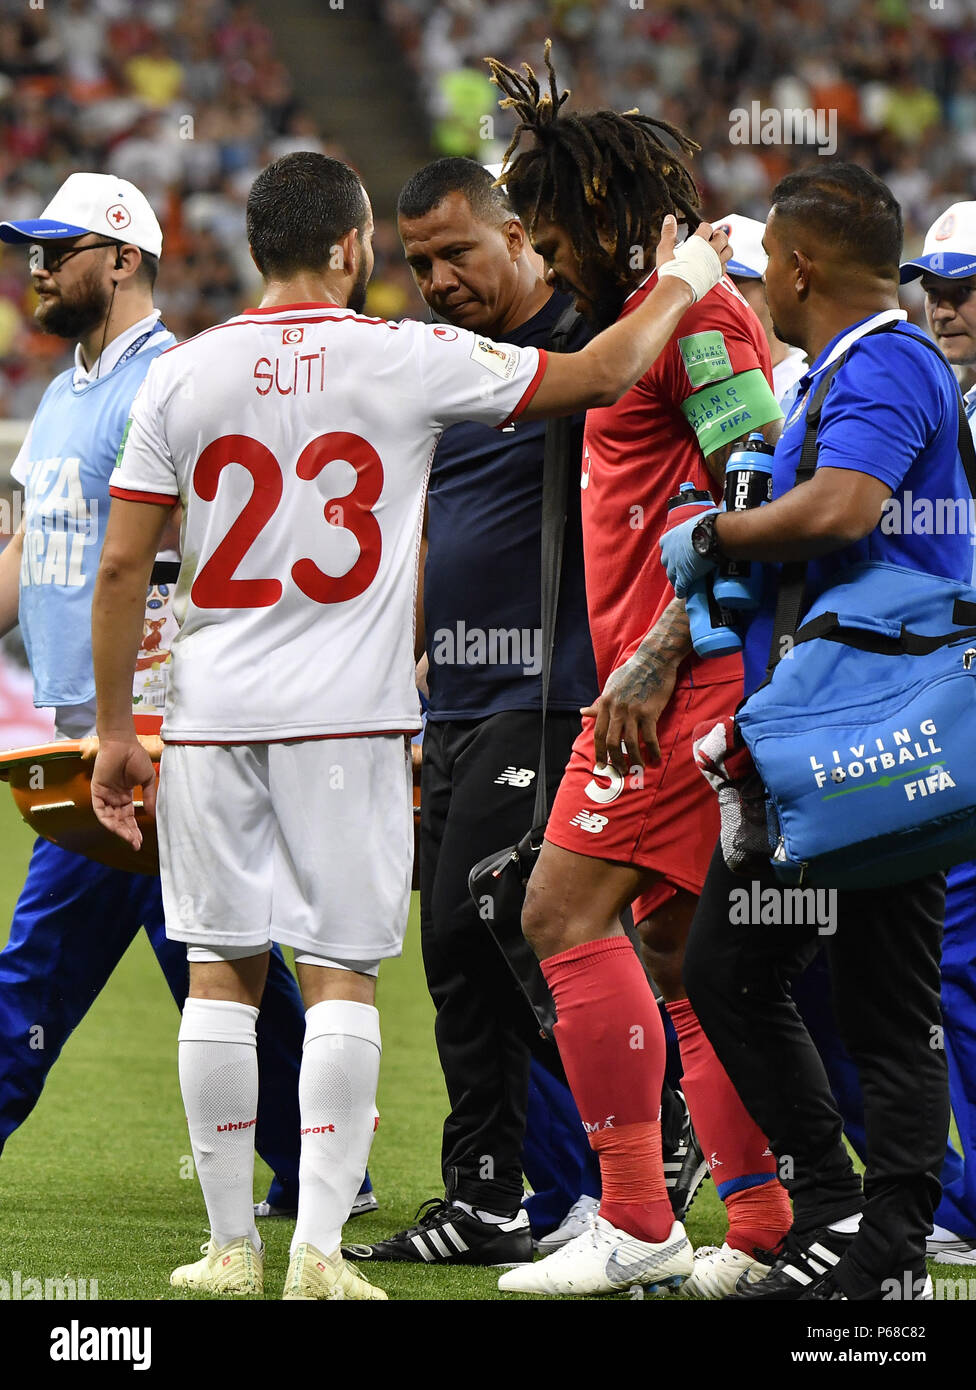 Saransk, Russia. 28th June, 2018. Roman Torres of Panama leaves the pitch after his injury during the 2018 FIFA World Cup Group G match between Panama and Tunisia in Saransk, Russia, June 28, 2018. Credit: He Canling/Xinhua/Alamy Live News Stock Photo